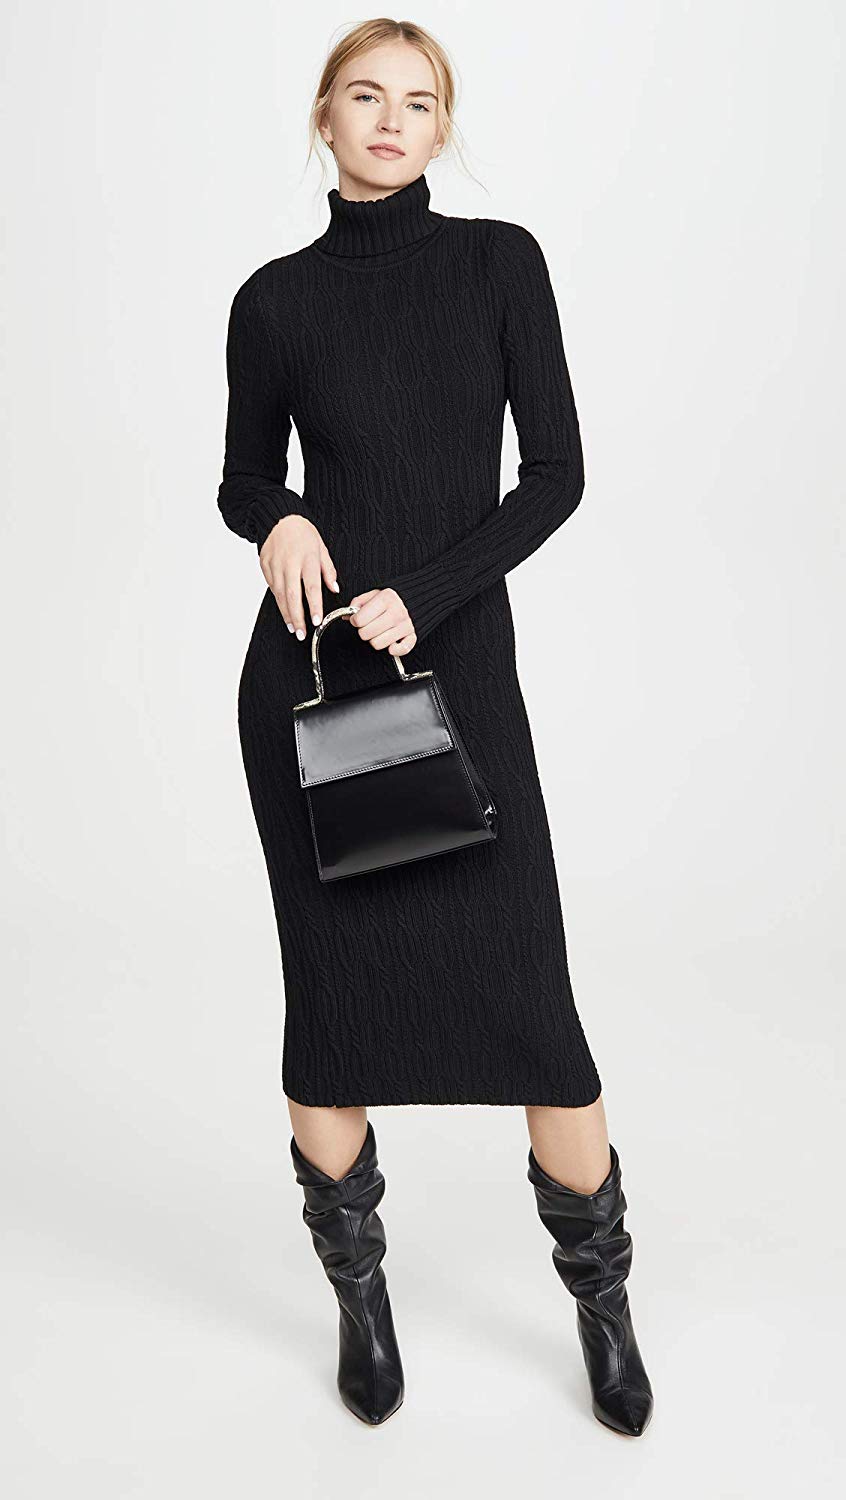 Buy > sweater dress with turtleneck > in stock